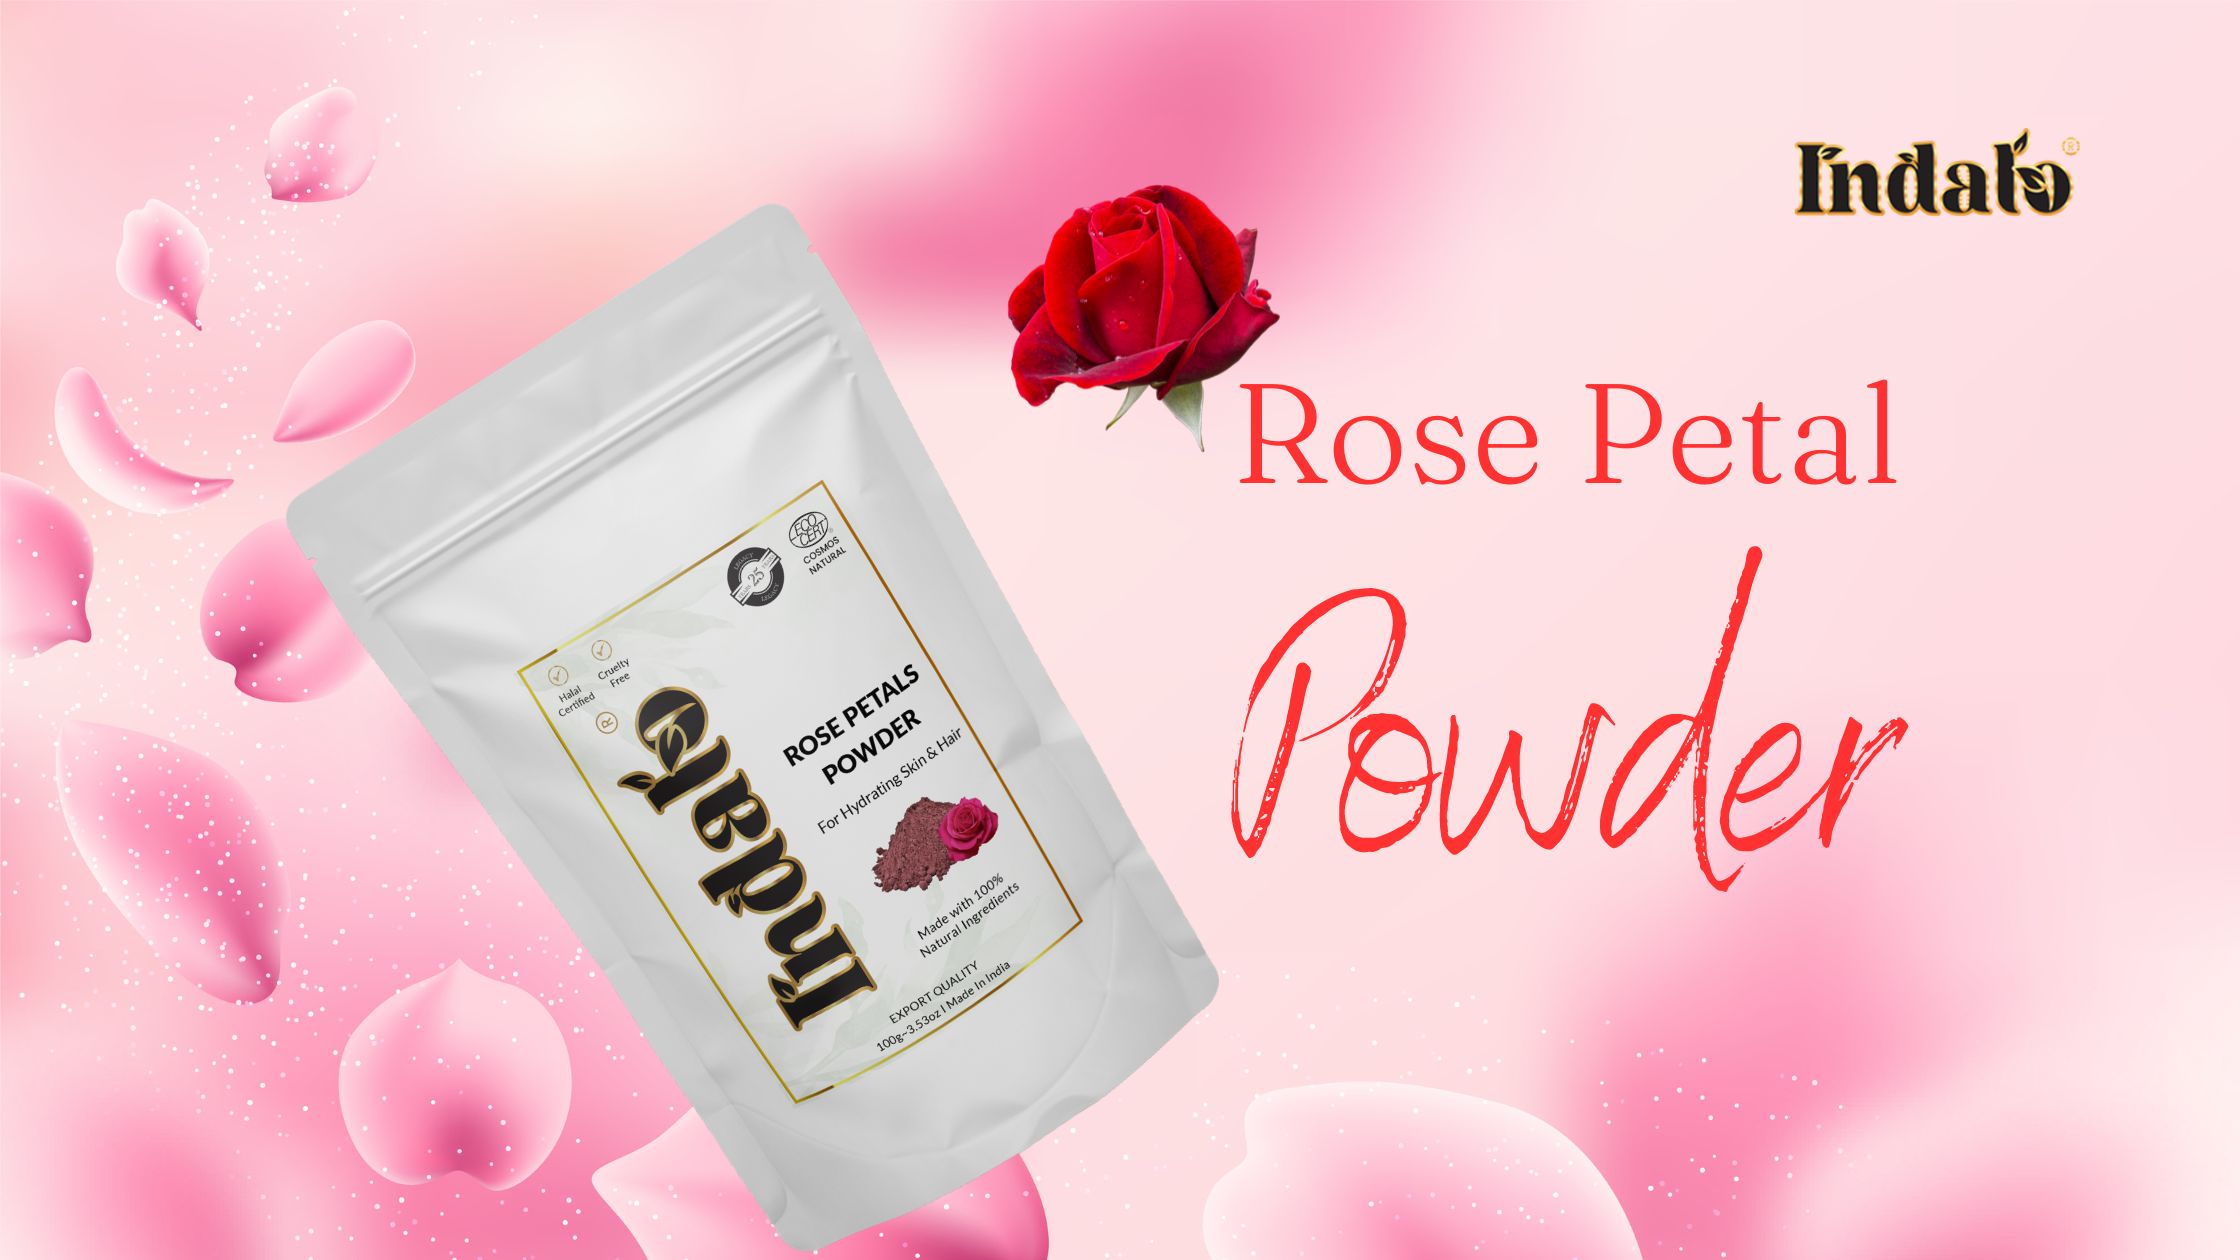 Get Smooth and Radiant Skin with Indalo Rose Petal Powder for Skin and Hair